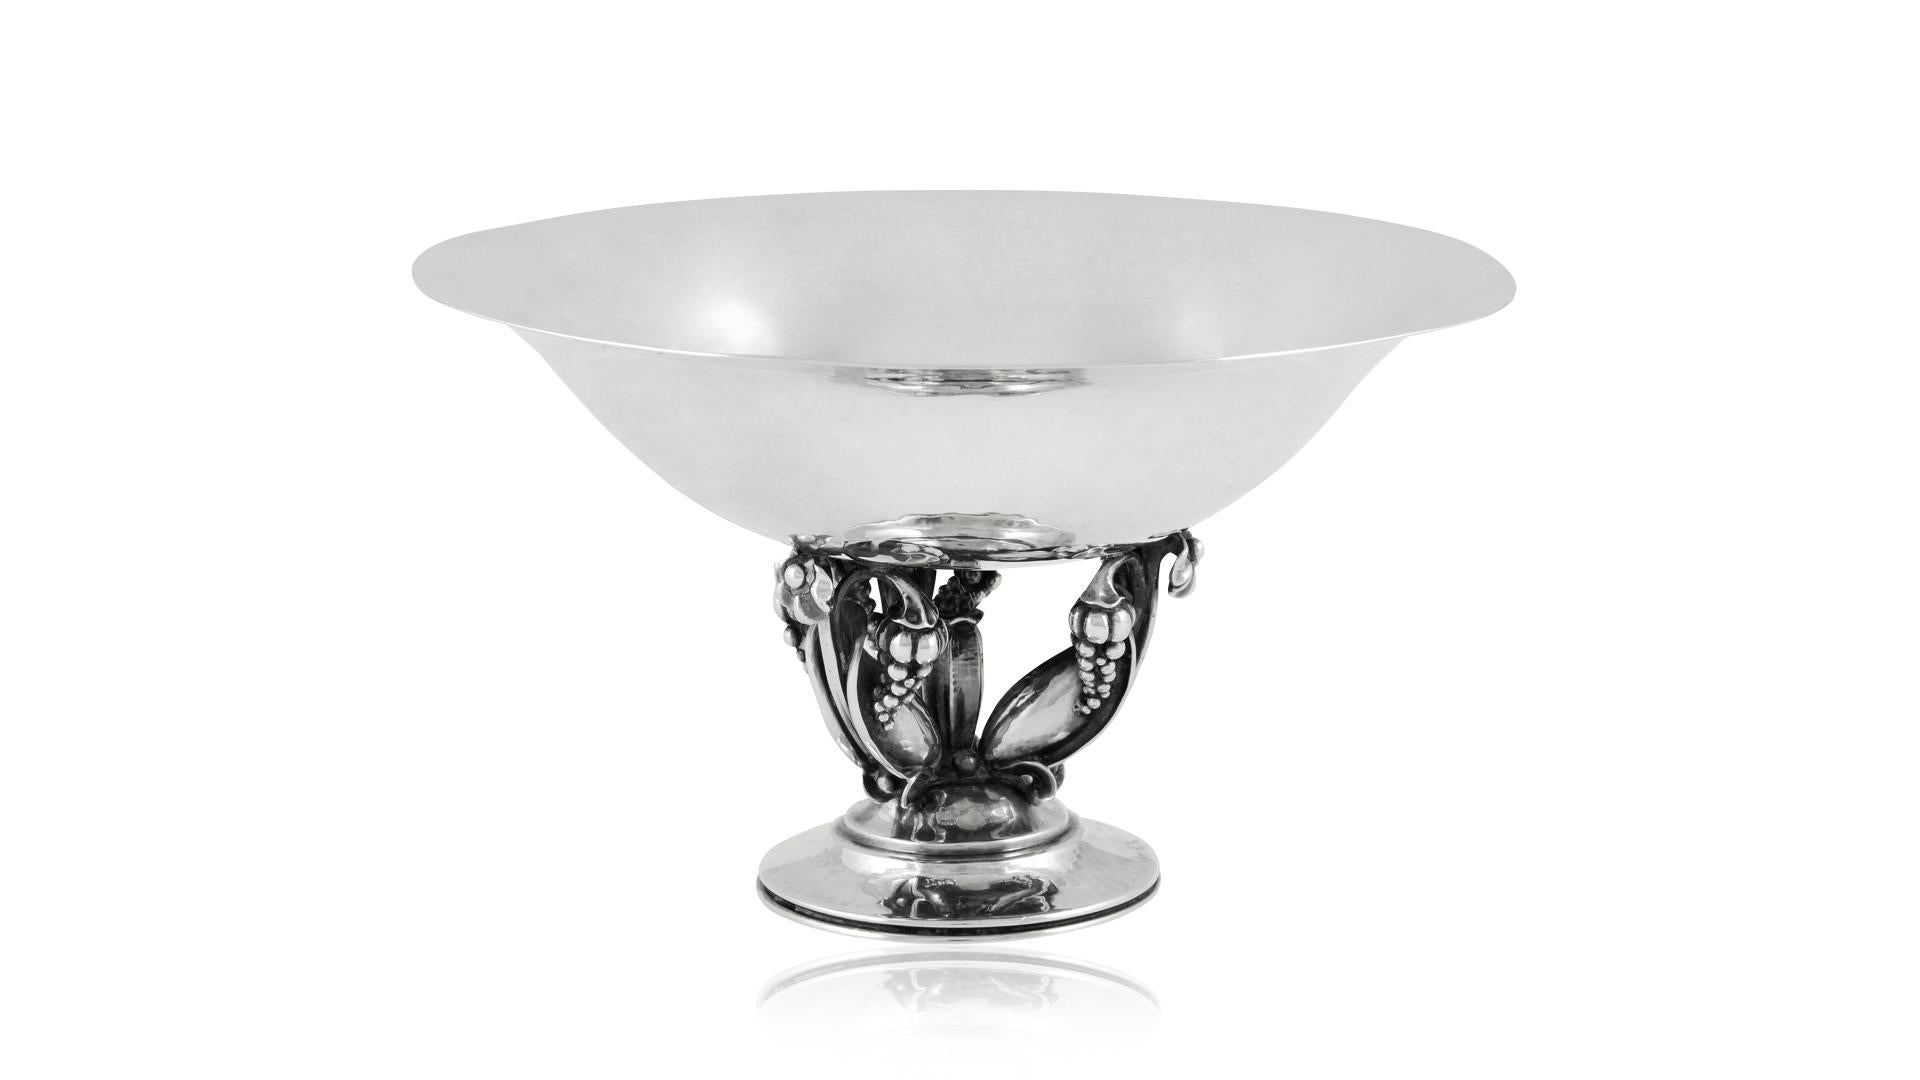 A Vintage Danish sterling silver Georg Jensen bowl #468c, designed by Gundorph Albertus in 1926. The bowl features delicate floral and grape details, a very organic looking piece. The size makes this piece a humble addition to any tabletop, bringing